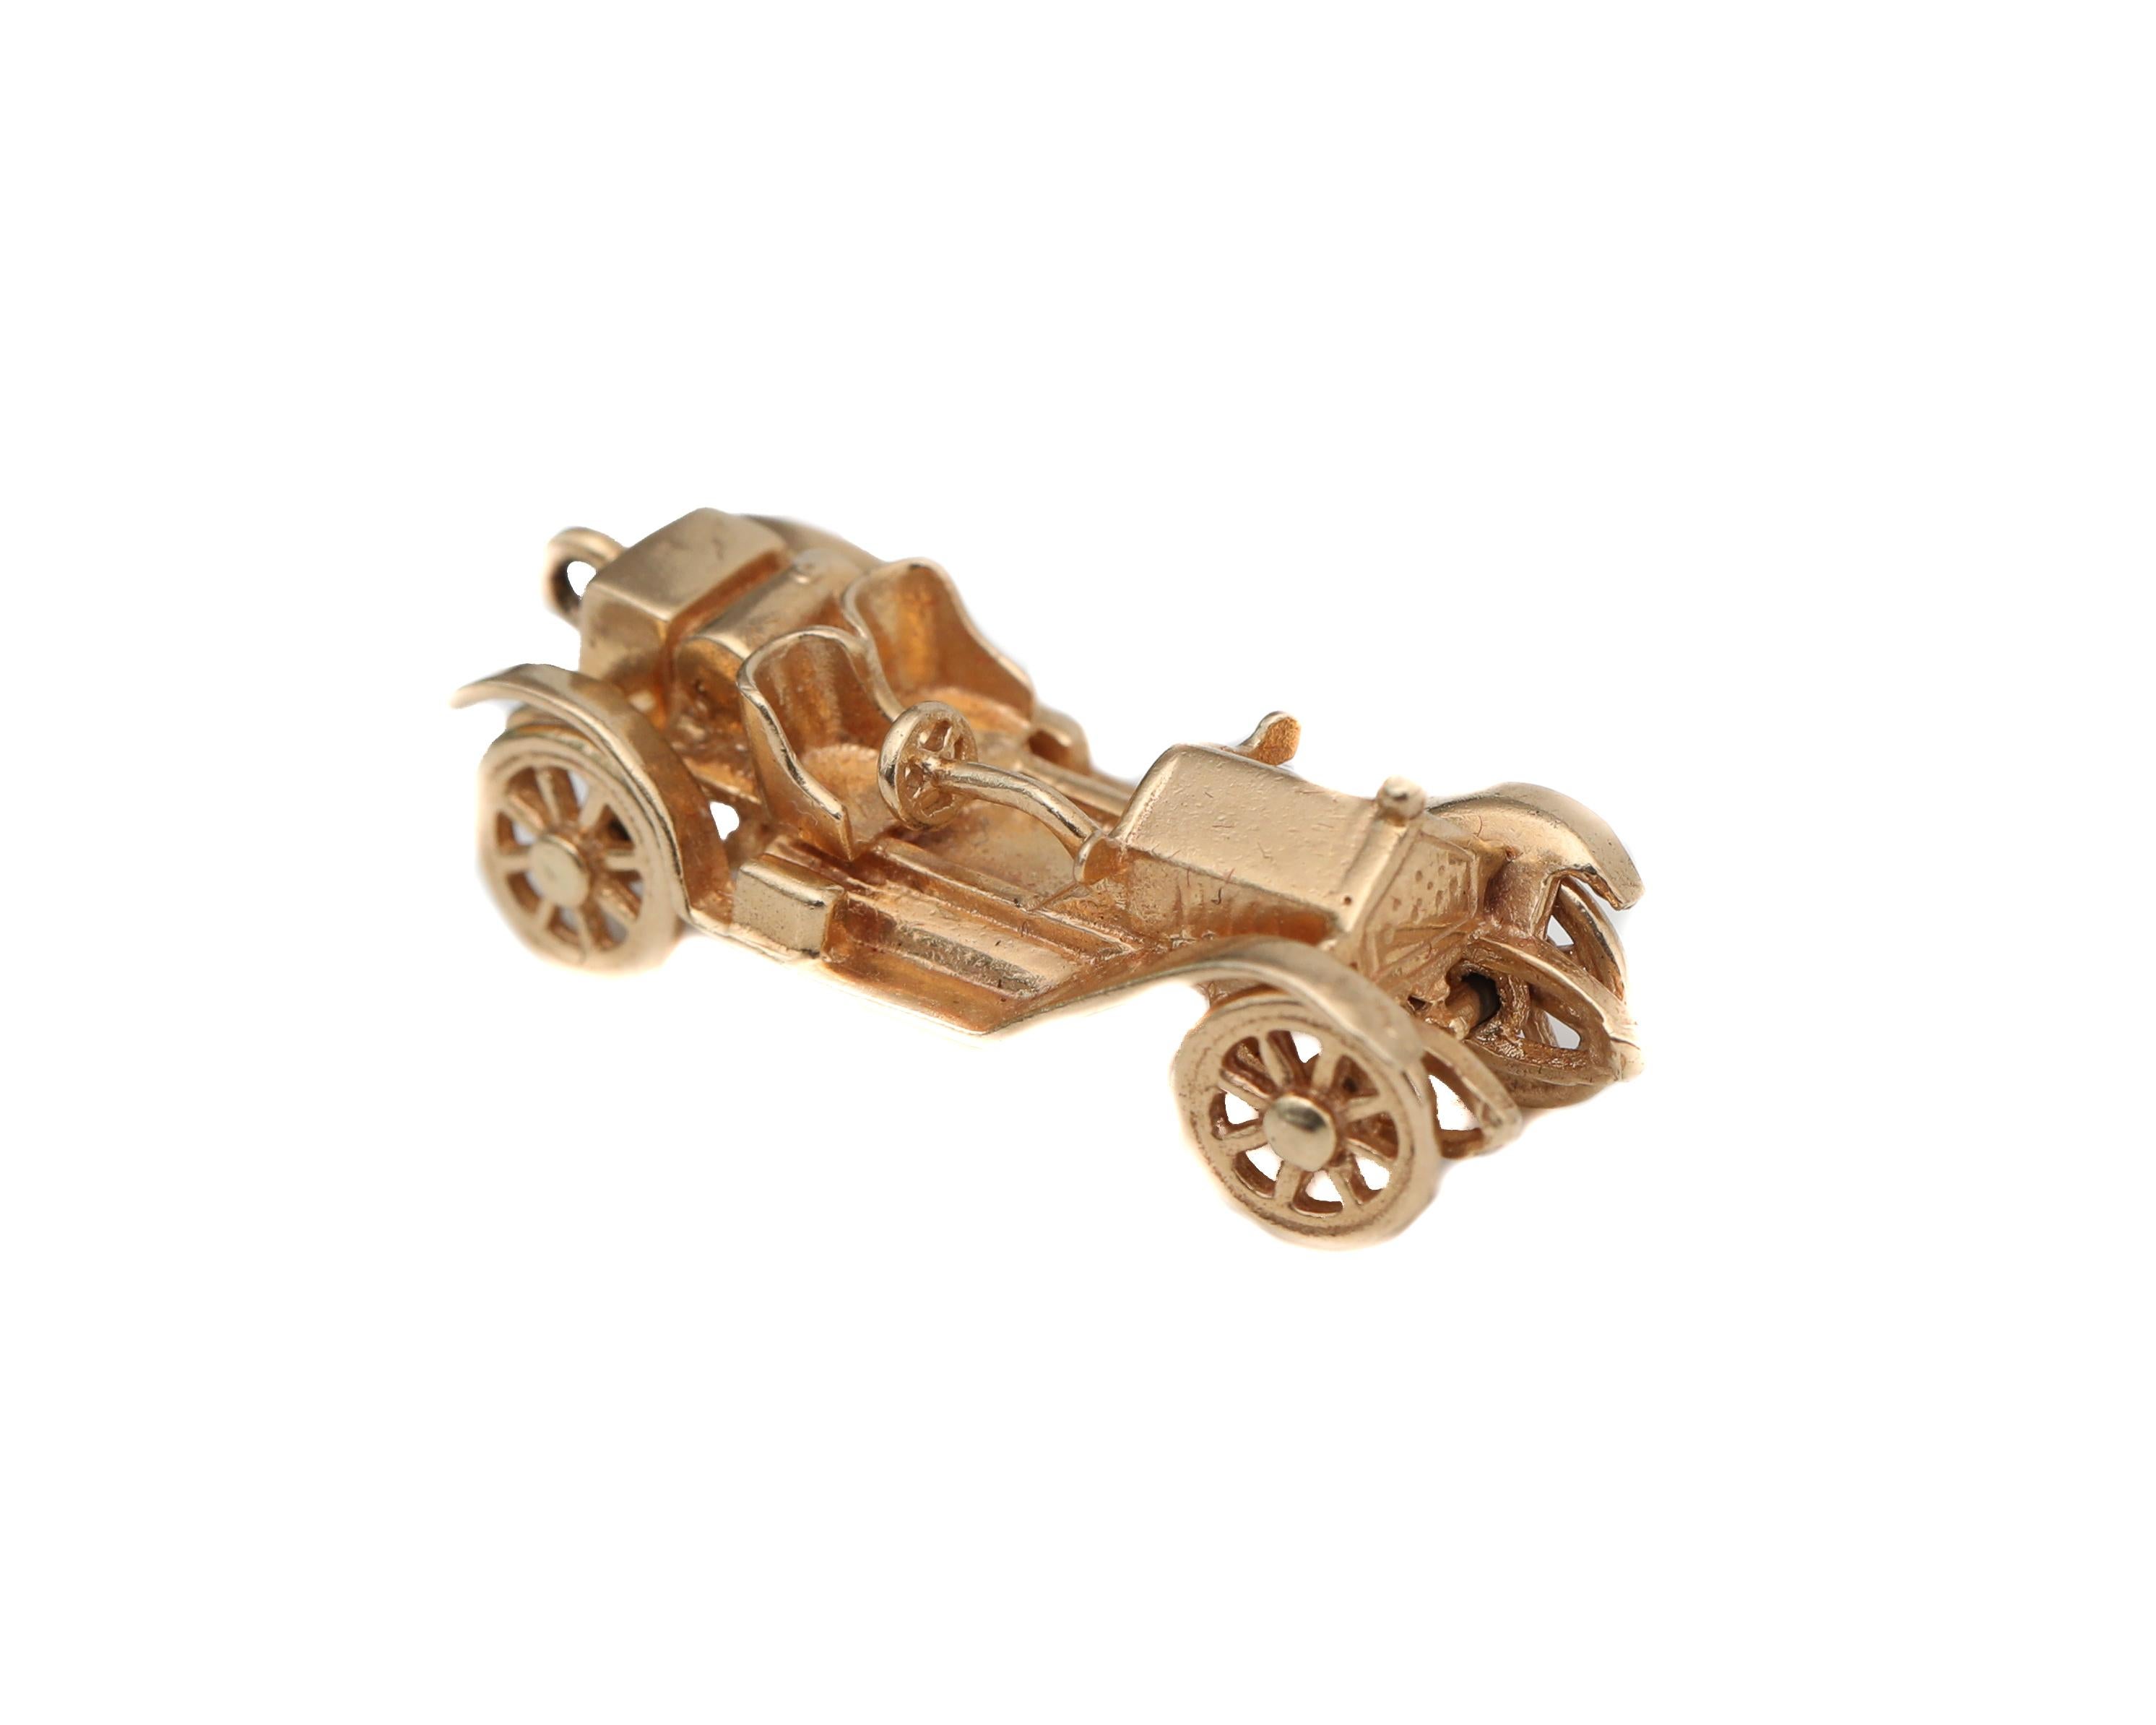 Adorable Rolls Royce Style Car Charm from the 1950s
Vintage car with vintage detailing 
Crafted in 14 Karat Yellow Gold
Every feature and accessory on the car is extremely well made. All 4 wheels on the car move easily. 

Wear it on a bracelet as a